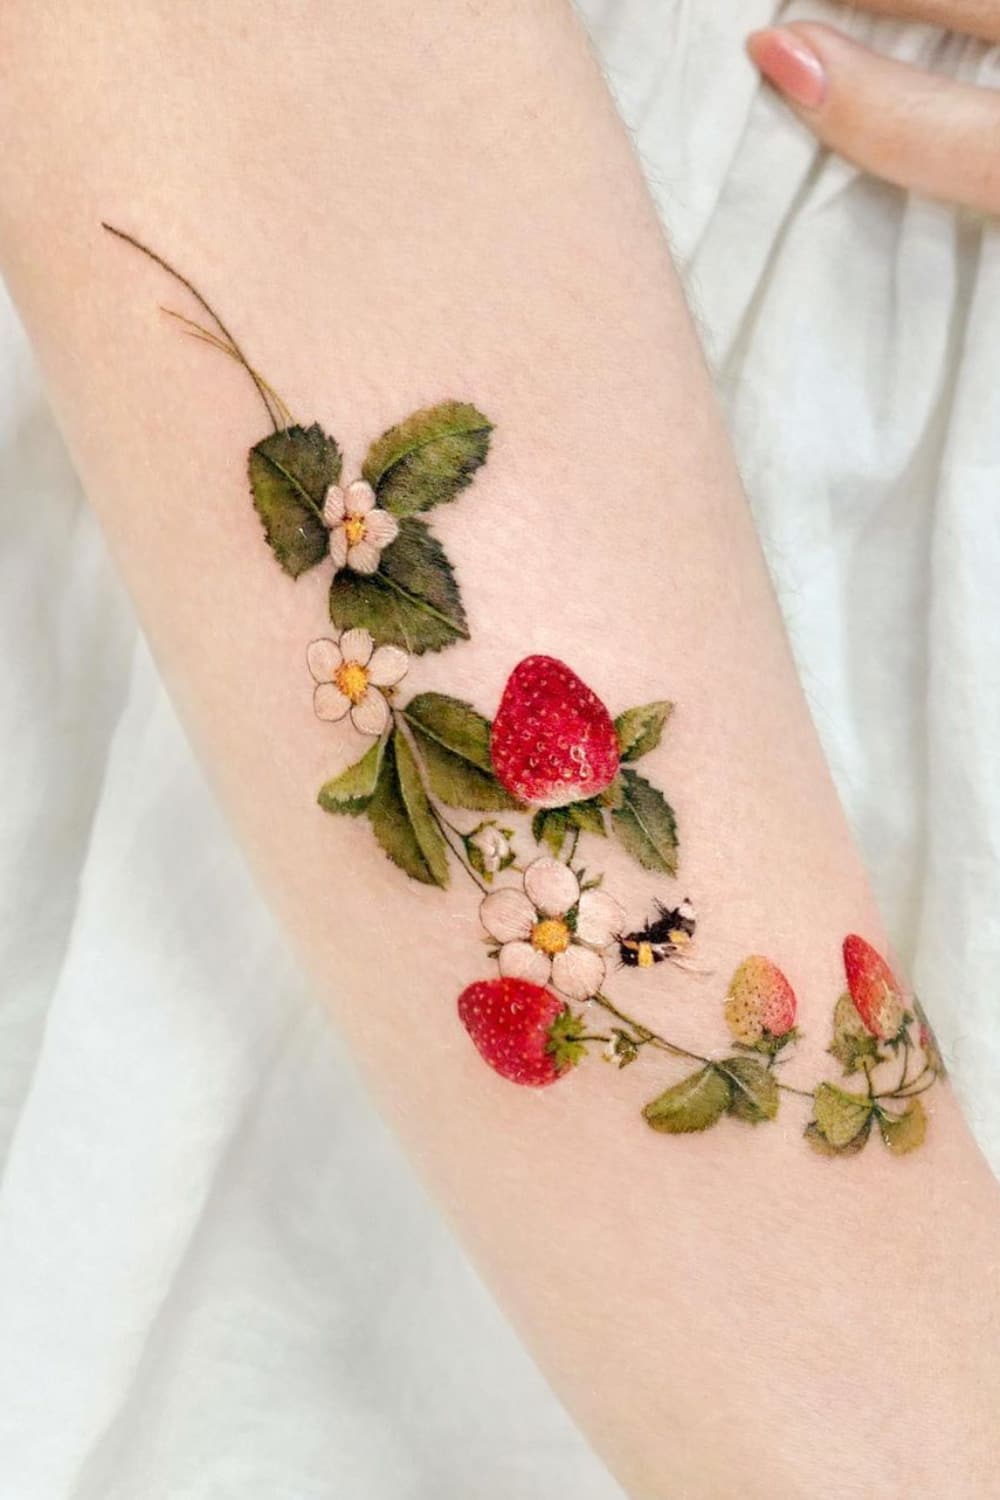 Strawberry Tattoo With Bee